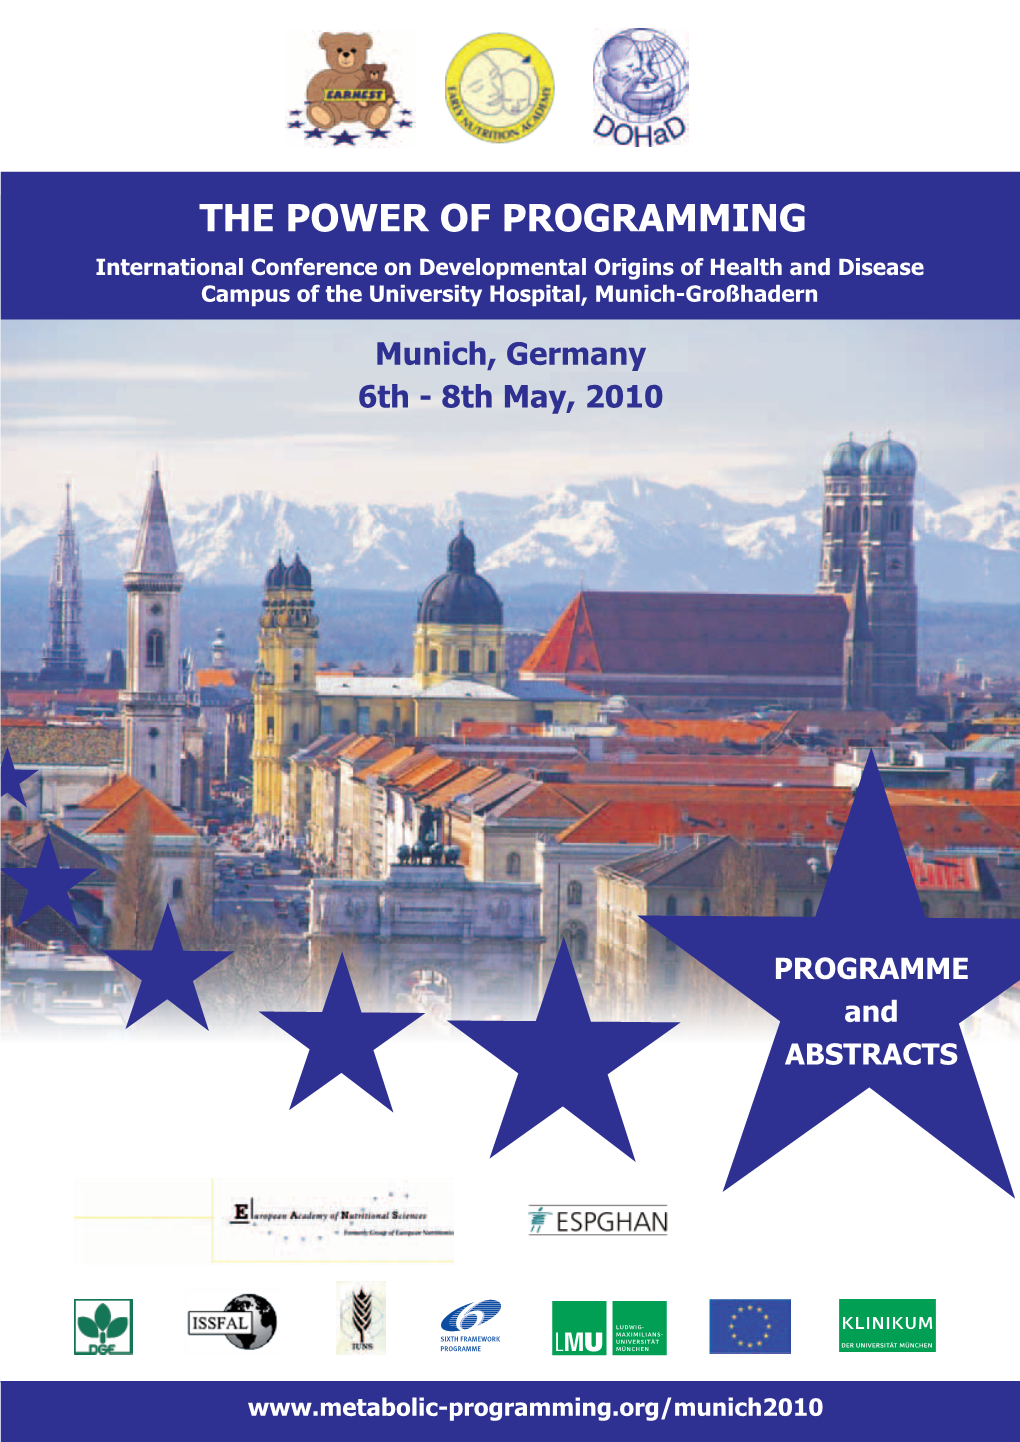 THE POWER of PROGRAMMING International Conference on Developmental Origins of Health and Disease Campus of the University Hospital, Munich-Großhadern